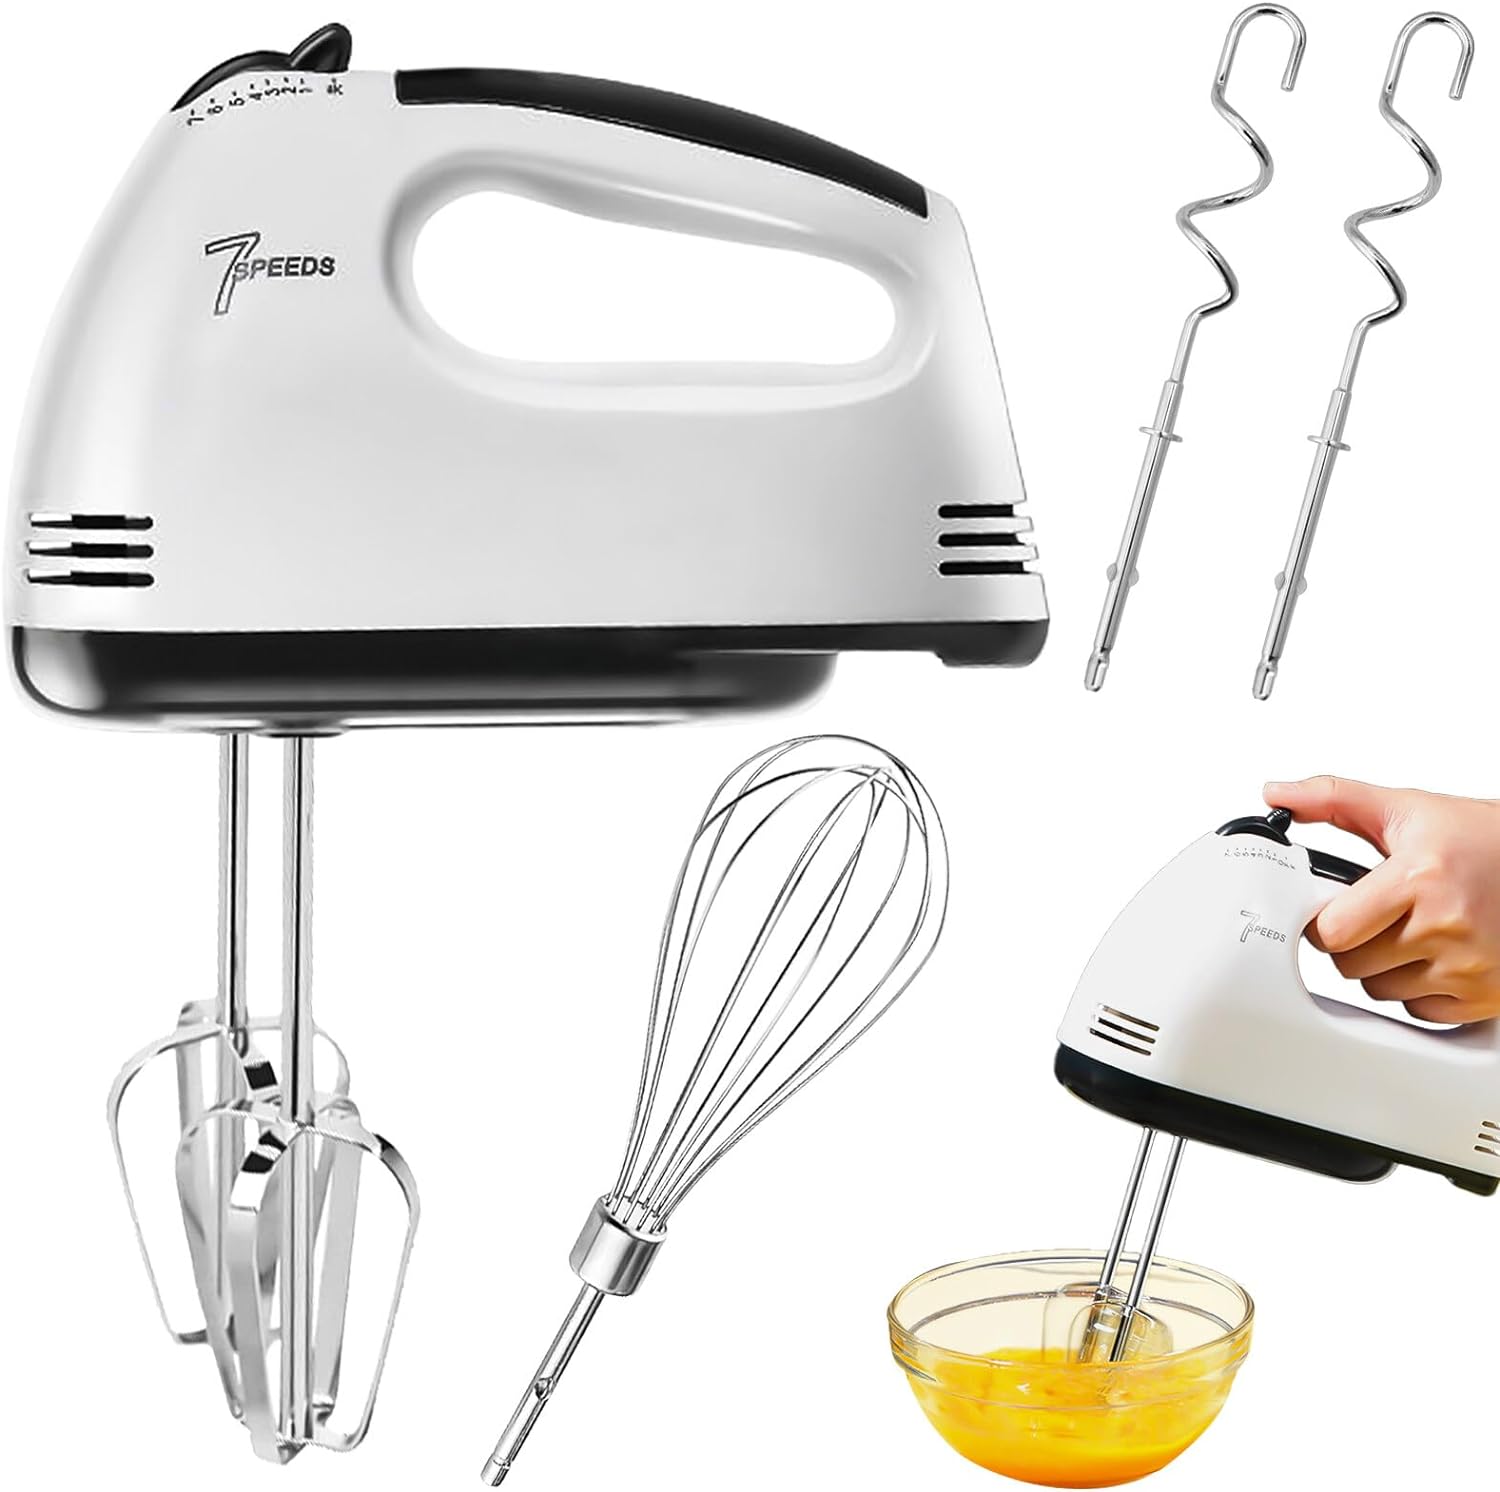 Electric Hand Mixer: 120 W Hand Mixer, 7 Levels Hand Mixer, Mixer, Includes 2 Whisks, 2 Stainless Steel Dough Hooks, 1 Whisk, Hand Mixer For Baking Kitchen Cakes, Egg Cream Food Beater